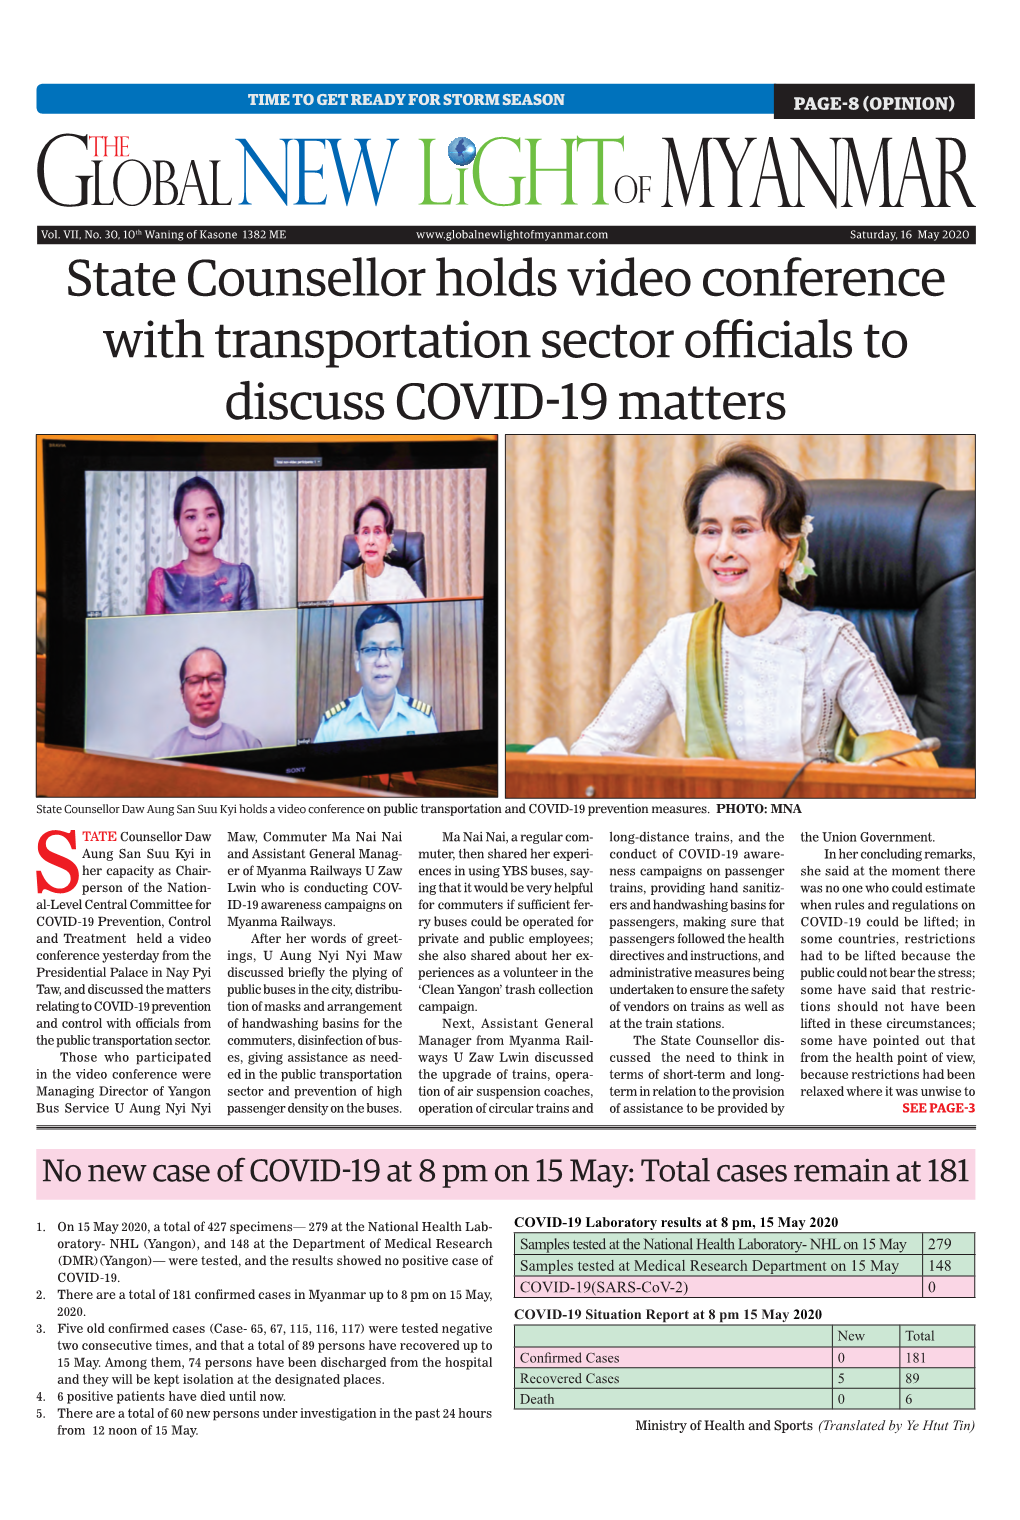 State Counsellor Holds Video Conference with Transportation Sector Officials to Discuss COVID-19 Matters